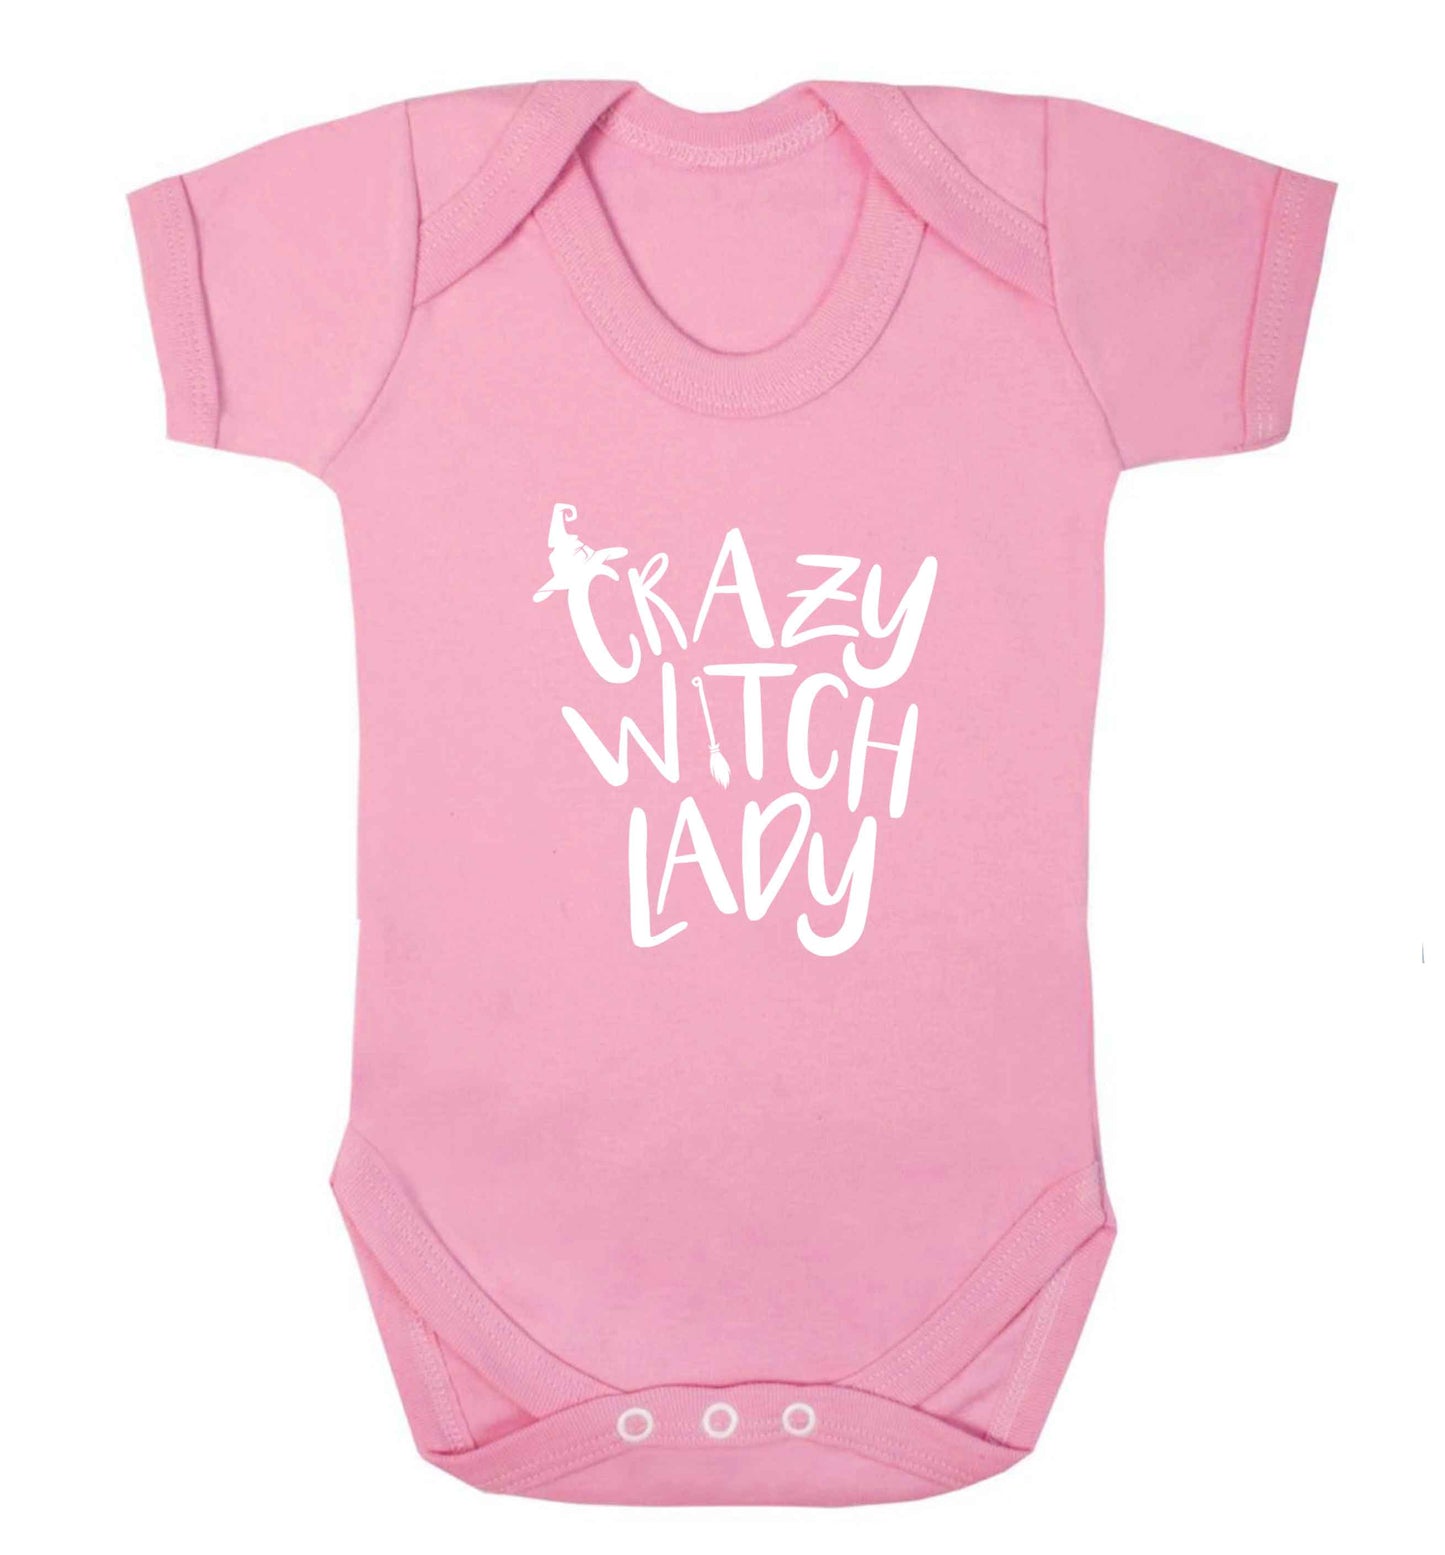 Crazy witch lady baby vest pale pink 18-24 months